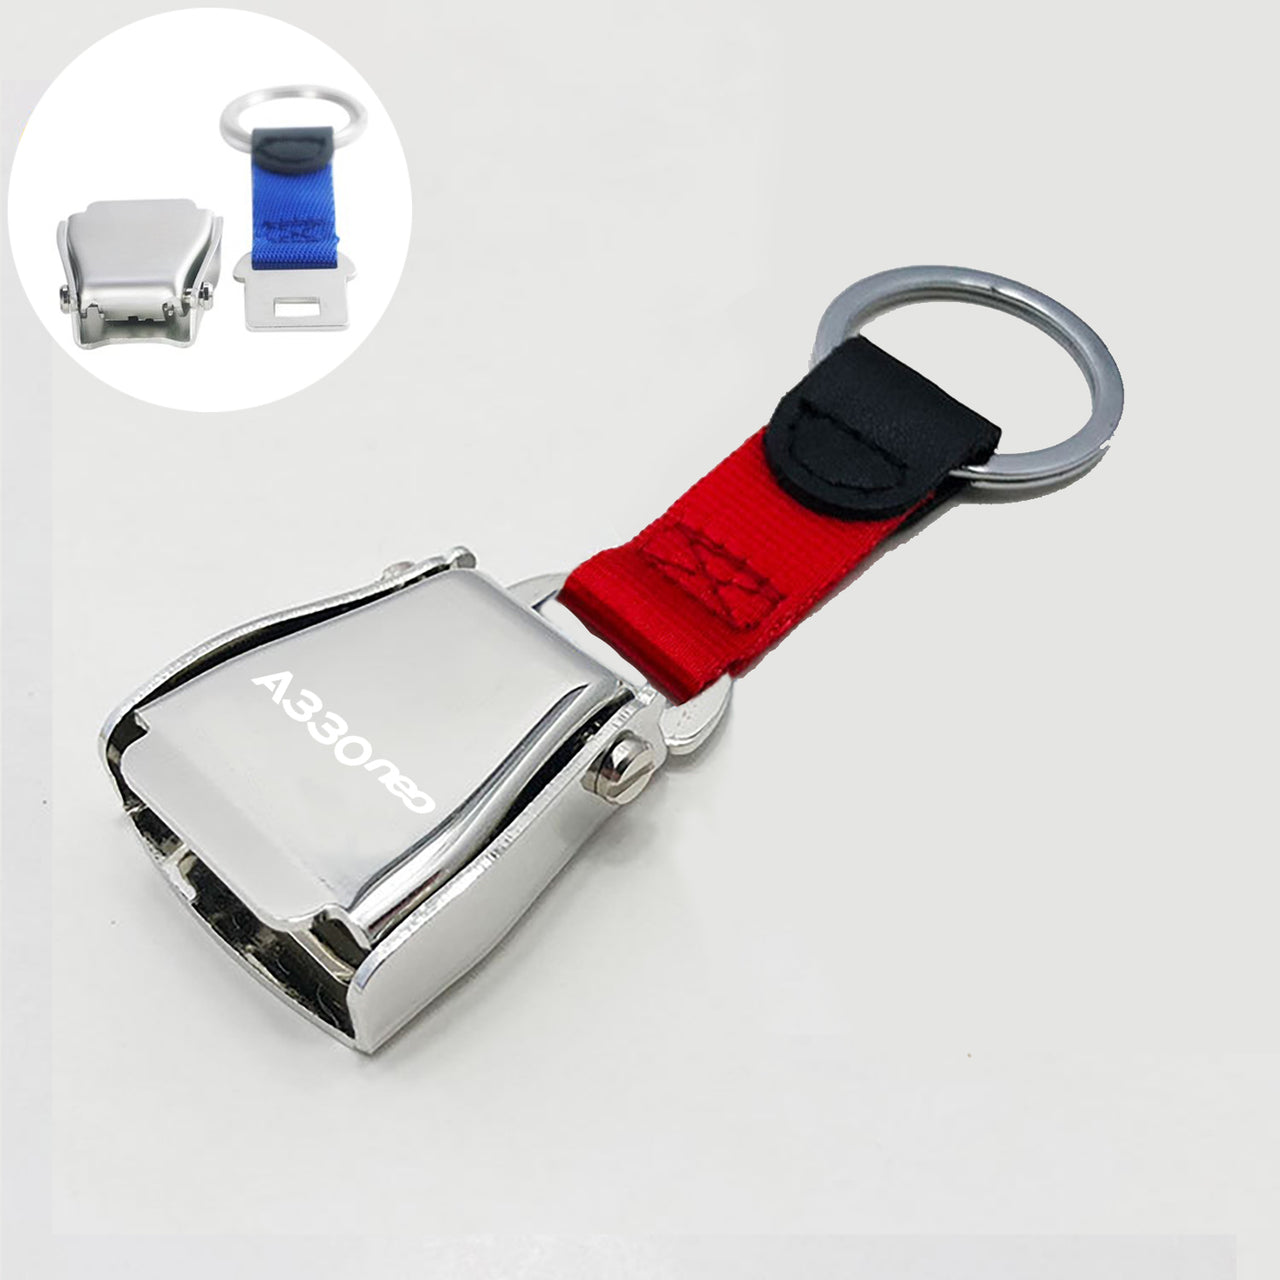 A330neo & Text Designed Airplane Seat Belt Key Chains